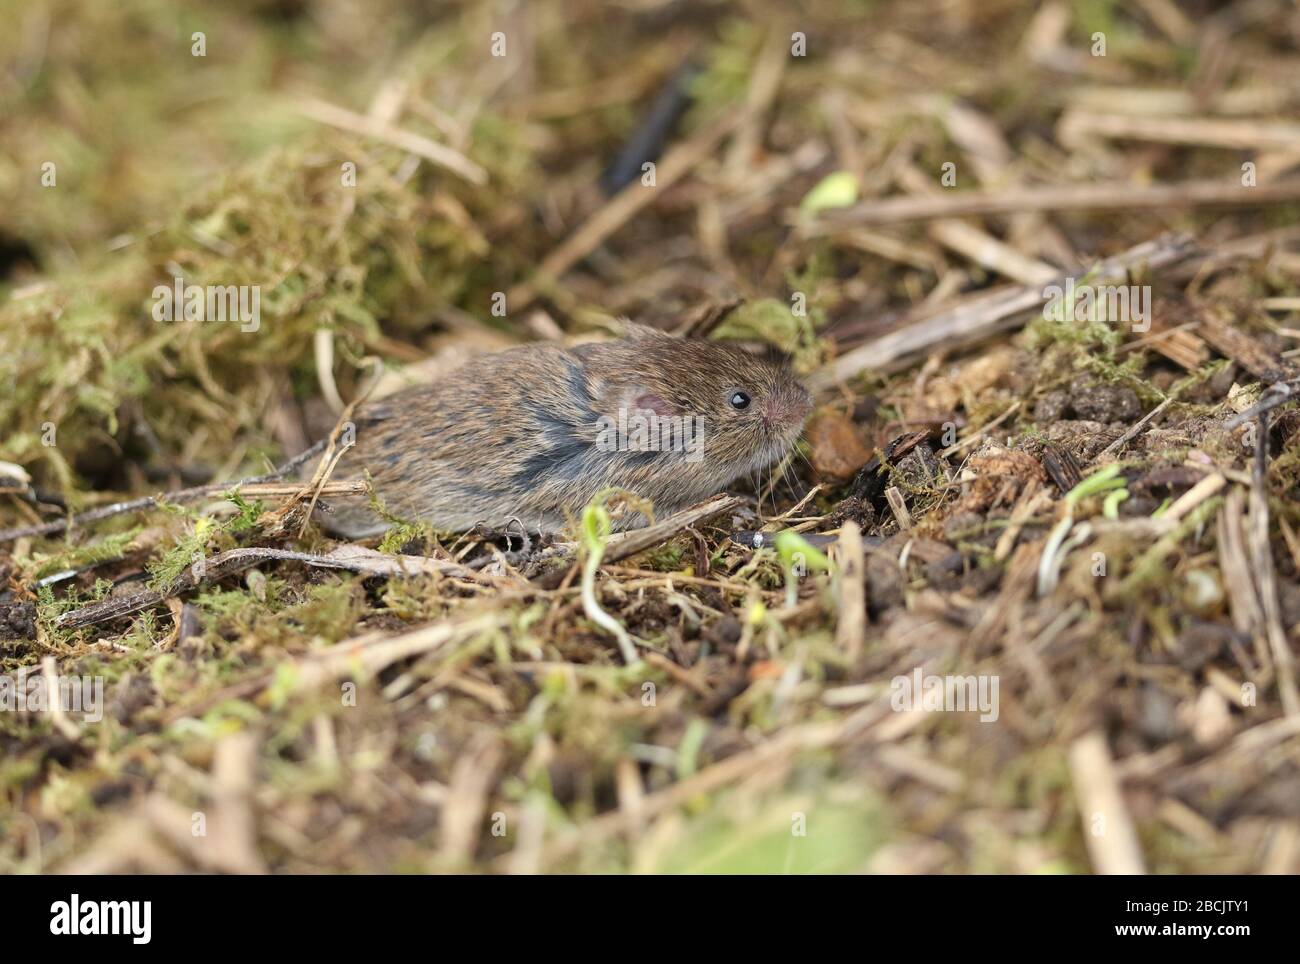 https://c8.alamy.com/comp/2BCJTY1/a-cute-field-or-short-tailed-vole-microtus-agrestis-emerging-from-its-nest-in-a-field-in-the-uk-2BCJTY1.jpg